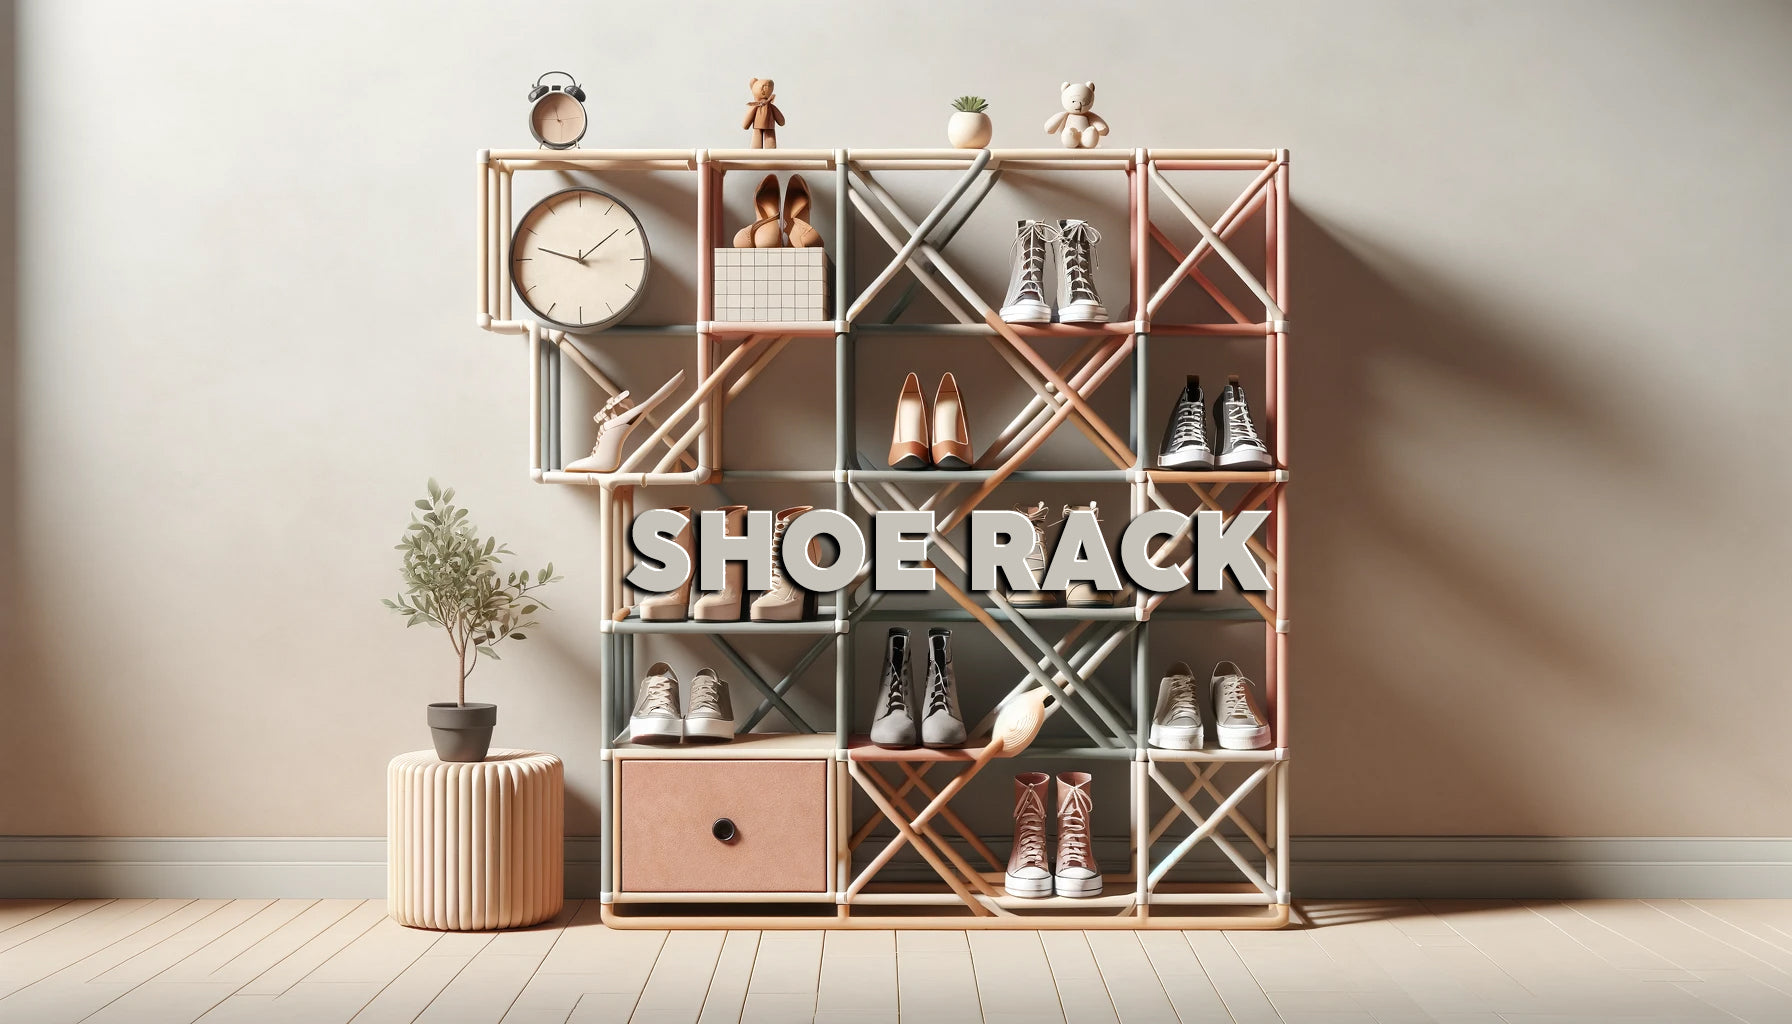 Sleek and Durable Shoe Racks - Organize and Protect Your Footwear"